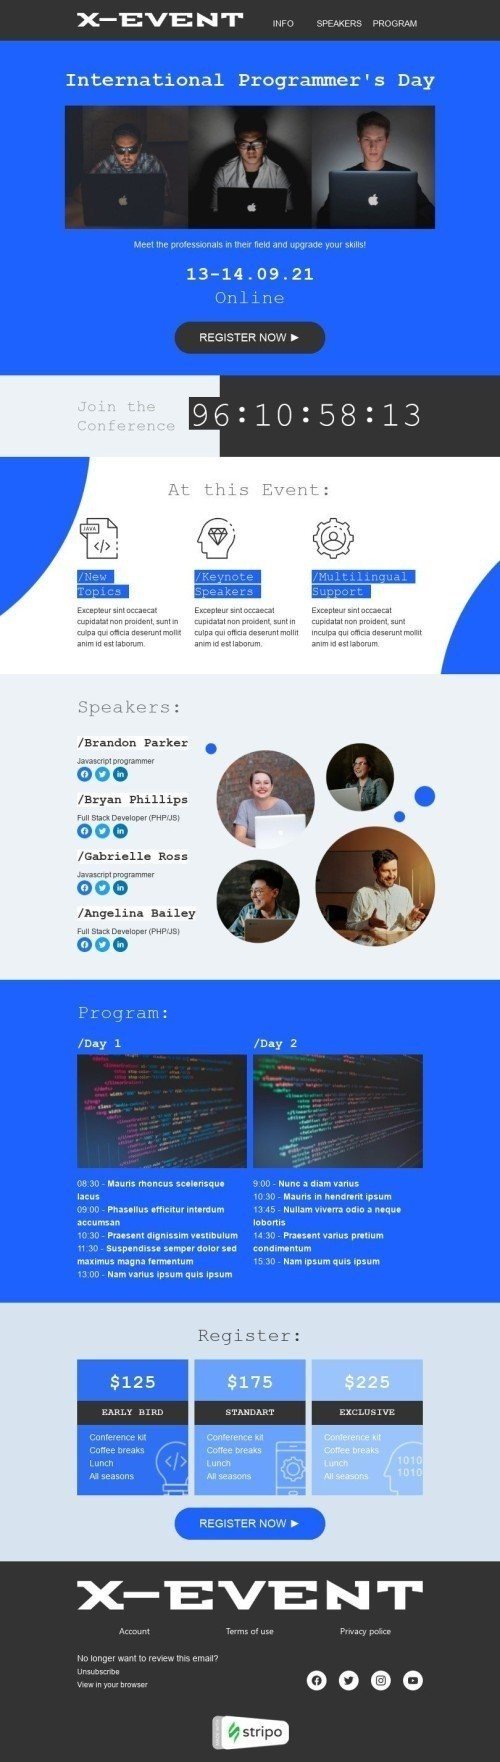 International Programmers' Day Email Template «Upgrade your skills» for Hobbies industry mobile view